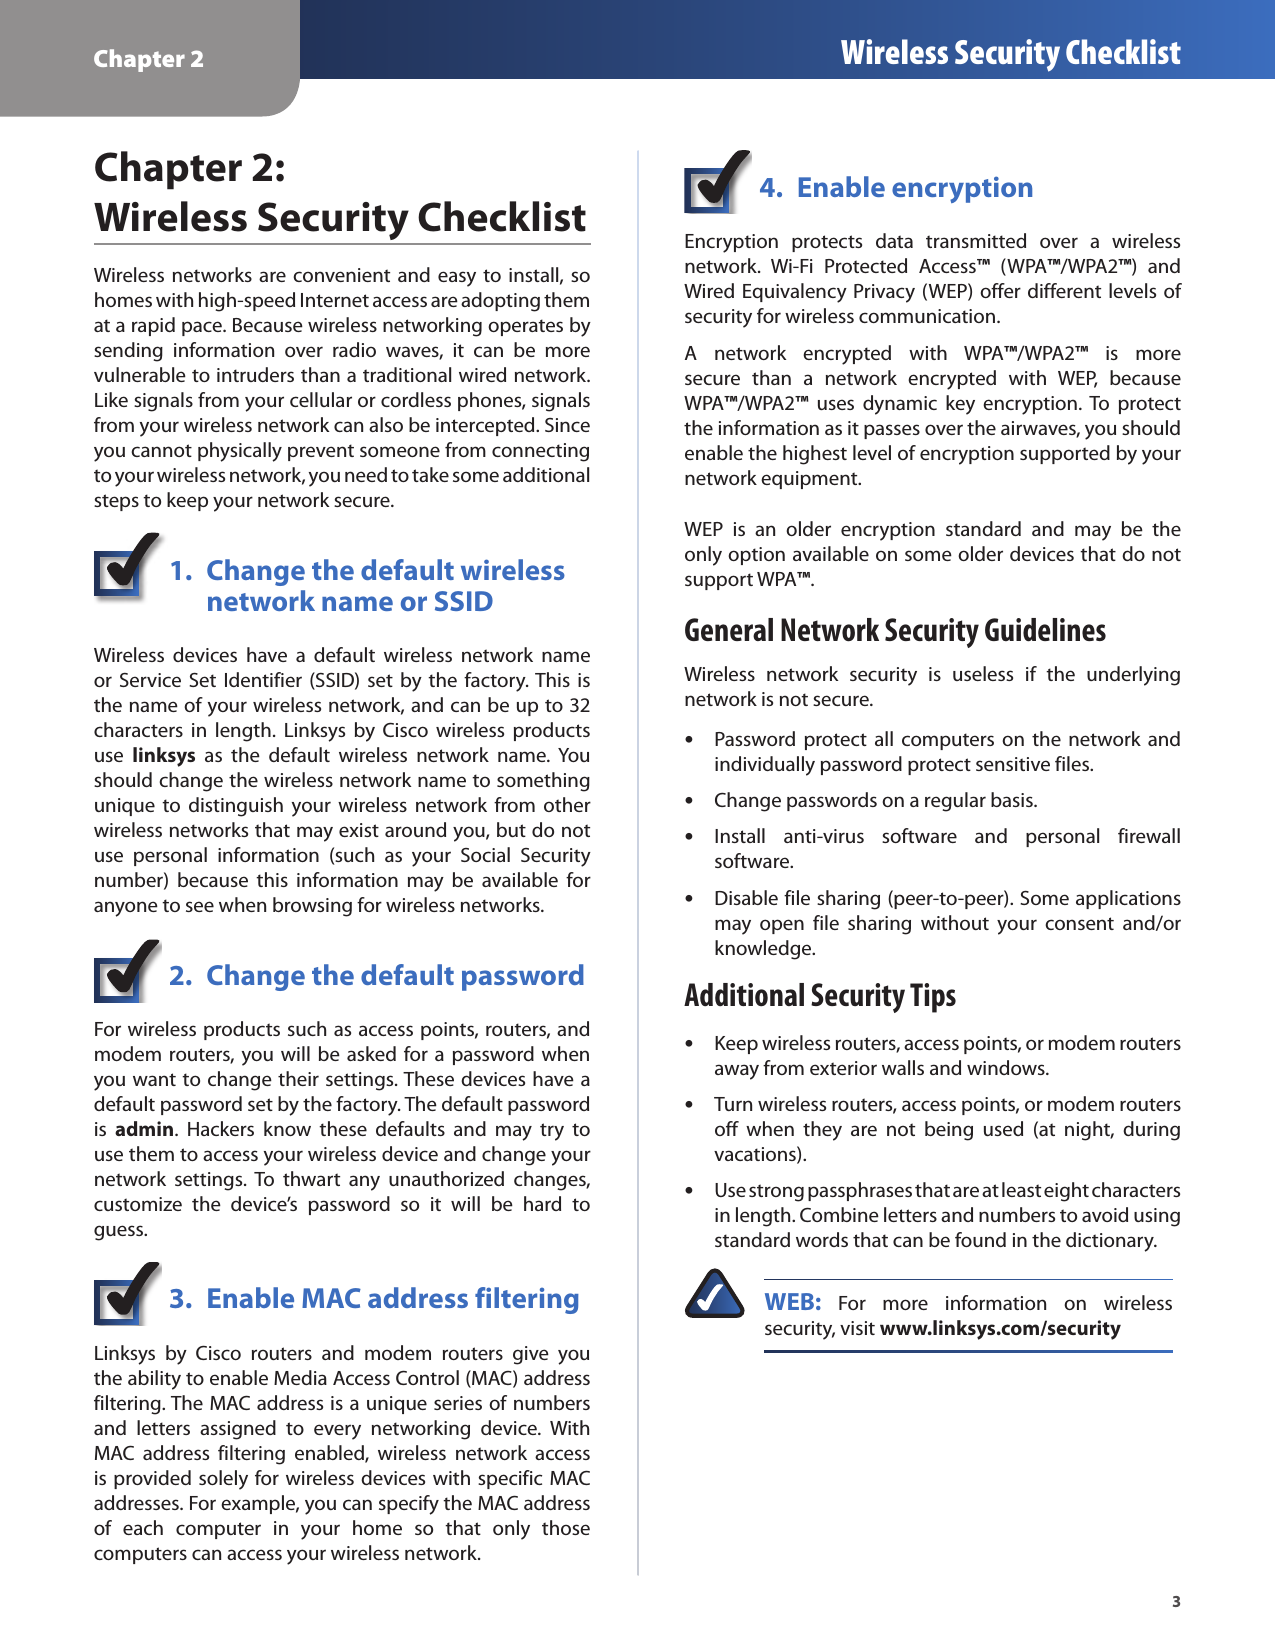 Chapter 2 Wireless Security Checklist3Chapter 2:  Wireless Security ChecklistWireless networks are convenient  and easy to install, so homes with high-speed Internet access are adopting them at a rapid pace. Because wireless networking operates by sending  information  over  radio  waves,  it  can  be  more vulnerable to intruders than a traditional wired network. Like signals from your cellular or cordless phones, signals from your wireless network can also be intercepted. Since you cannot physically prevent someone from connecting to your wireless network, you need to take some additional steps to keep your network secure. 1.  Change the default wireless    network name or SSIDWireless  devices  have  a  default  wireless  network  name or Service Set Identifier (SSID)  set  by the  factory. This is the name of your wireless network, and can be up to 32 characters  in  length.  Linksys  by  Cisco  wireless  products use  linksys  as  the  default  wireless  network  name. You should change the wireless network name to something unique  to  distinguish  your  wireless  network  from  other wireless networks that may exist around you, but do not use  personal  information  (such  as  your  Social  Security number)  because  this  information  may  be  available  for anyone to see when browsing for wireless networks. 2.  Change the default passwordFor wireless products such as access points, routers, and modem routers, you will be asked for a  password when you want to change their settings. These devices have a default password set by the factory. The default password is  admin.  Hackers  know  these  defaults  and  may  try  to use them to access your wireless device and change your network  settings. To  thwart  any  unauthorized  changes, customize  the  device’s  password  so  it  will  be  hard  to guess.3.  Enable MAC address filteringLinksys  by  Cisco  routers  and  modem  routers  give  you the ability to enable Media Access Control (MAC) address filtering. The MAC address is a unique series of numbers and  letters  assigned  to  every  networking  device.  With MAC  address  filtering  enabled,  wireless  network  access is provided solely for wireless devices with specific MAC addresses. For example, you can specify the MAC address of  each  computer  in  your  home  so  that  only  those computers can access your wireless network. 4.  Enable encryptionEncryption  protects  data  transmitted  over  a  wireless network.  Wi-Fi  Protected  Access™  (WPA™/WPA2™)  and Wired Equivalency Privacy (WEP) offer different levels of security for wireless communication.A  network  encrypted  with  WPA™/WPA2™  is  more secure  than  a  network  encrypted  with  WEP,  because  WPA™/WPA2™  uses  dynamic  key  encryption. To  protect the information as it passes over the airwaves, you should enable the highest level of encryption supported by your network equipment. WEP  is  an  older  encryption  standard  and  may  be  the only option available on some older devices that do not support WPA™.General Network Security GuidelinesWireless  network  security  is  useless  if  the  underlying network is not secure. Password protect  all  computers  on  the  network  and  •individually password protect sensitive files.Change passwords on a regular basis. •Install  anti-virus  software  and  personal  firewall  •software.Disable file sharing (peer-to-peer). Some applications  •may  open  file  sharing  without  your  consent  and/or knowledge.Additional Security TipsKeep wireless routers, access points, or modem routers  •away from exterior walls and windows.Turn wireless routers, access points, or modem routers  •off  when  they  are  not  being  used  (at  night,  during vacations).Use strong passphrases that are at least eight characters  •in length. Combine letters and numbers to avoid using standard words that can be found in the dictionary. WEB:  For  more  information  on  wireless security, visit www.linksys.com/security